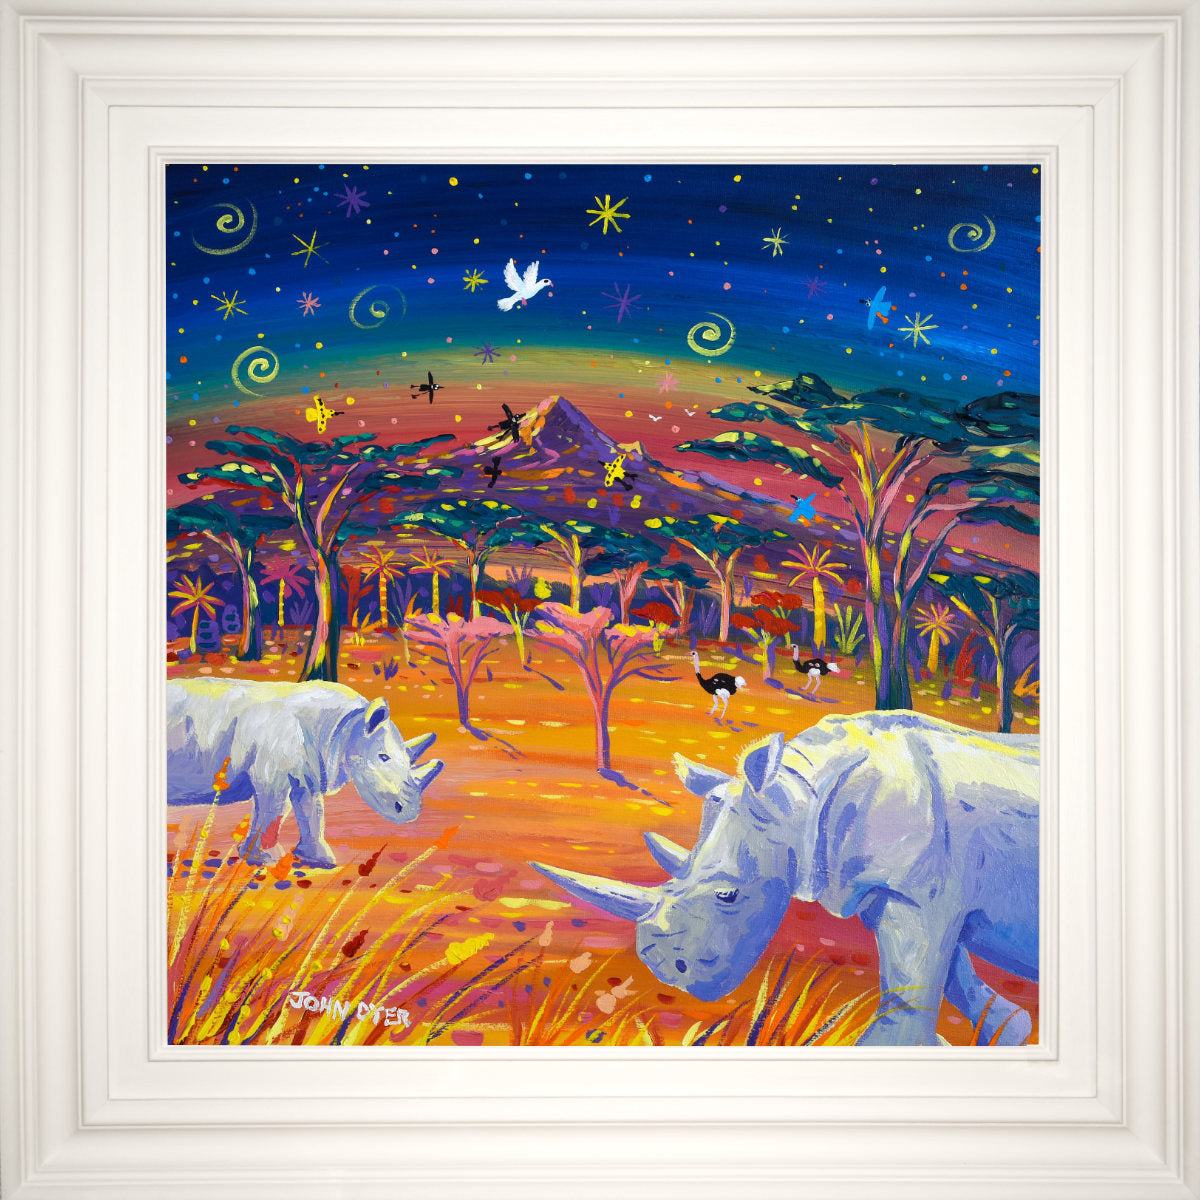 &#39;Rhinos in Paradise, Najin &amp; Fatu, the Last Two Northern White Rhino&#39;, 24x24 inches acrylic on canvas. African Painting by British Artist John Dyer.